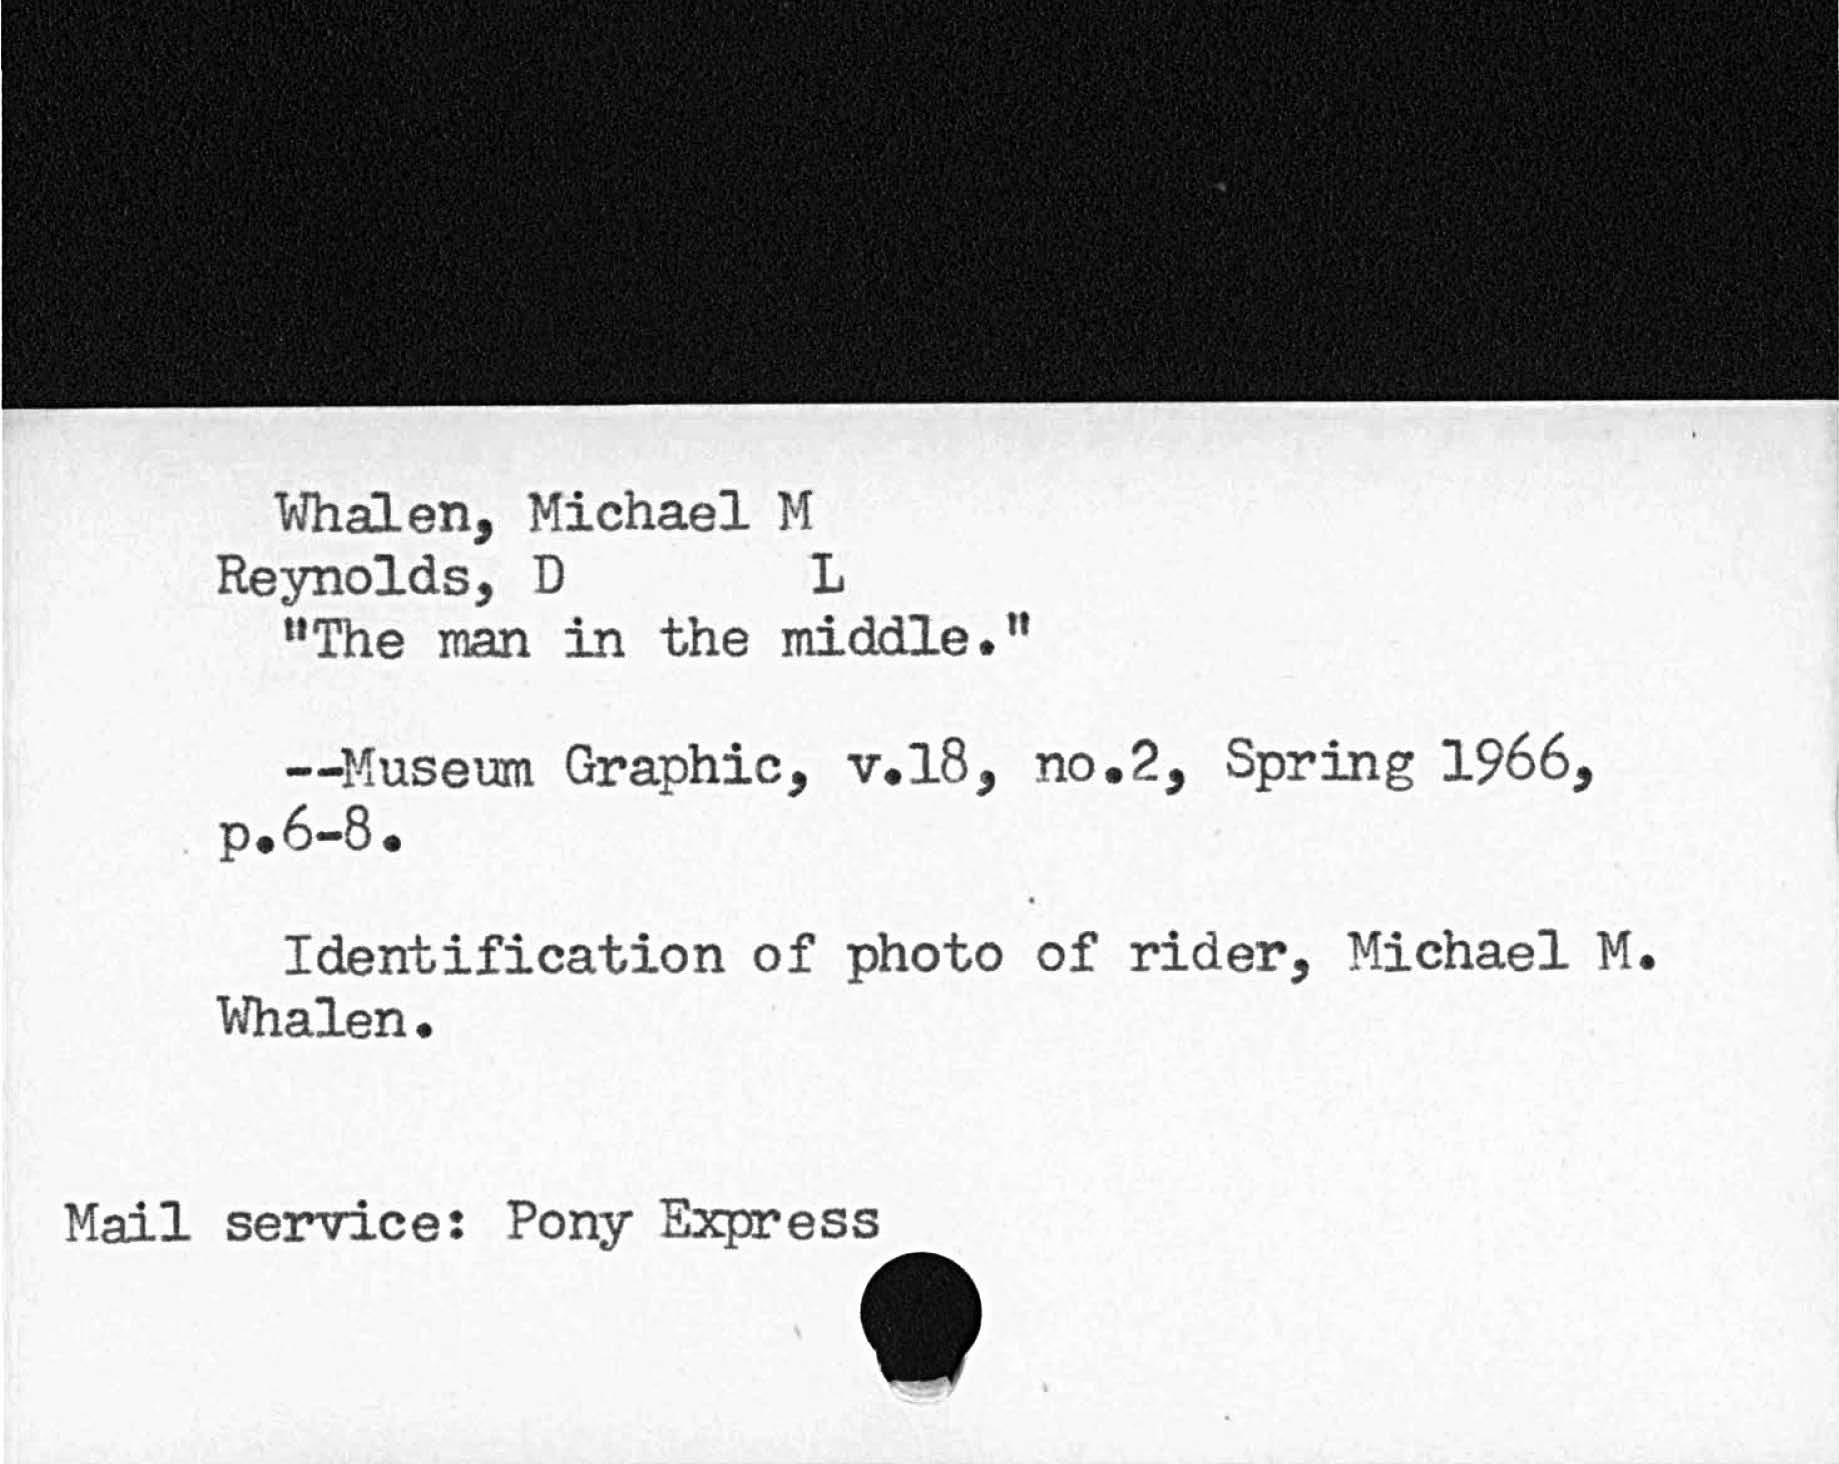 Whalen, Michael MReynolds, D LThe man in the middle.Museum Graphic, v. l8, no. 2, Spring 1966,p.6 8Identification of photo of rider, Michael M.Whalen.Mail service:  Pony Express